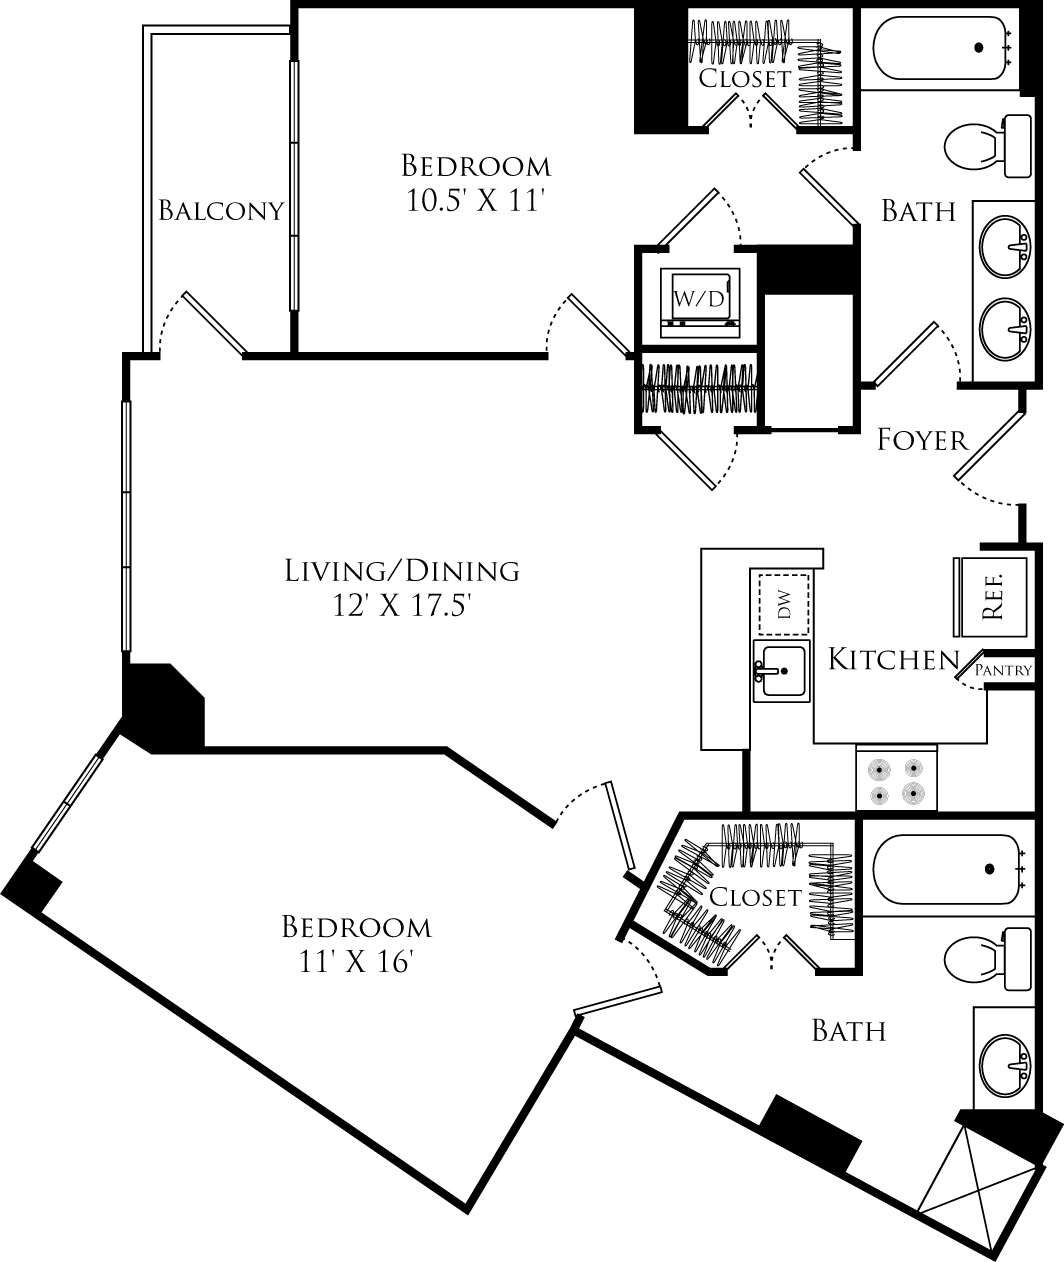 B2A floor plan with 2 beds, 2 baths and is 1016 square feet